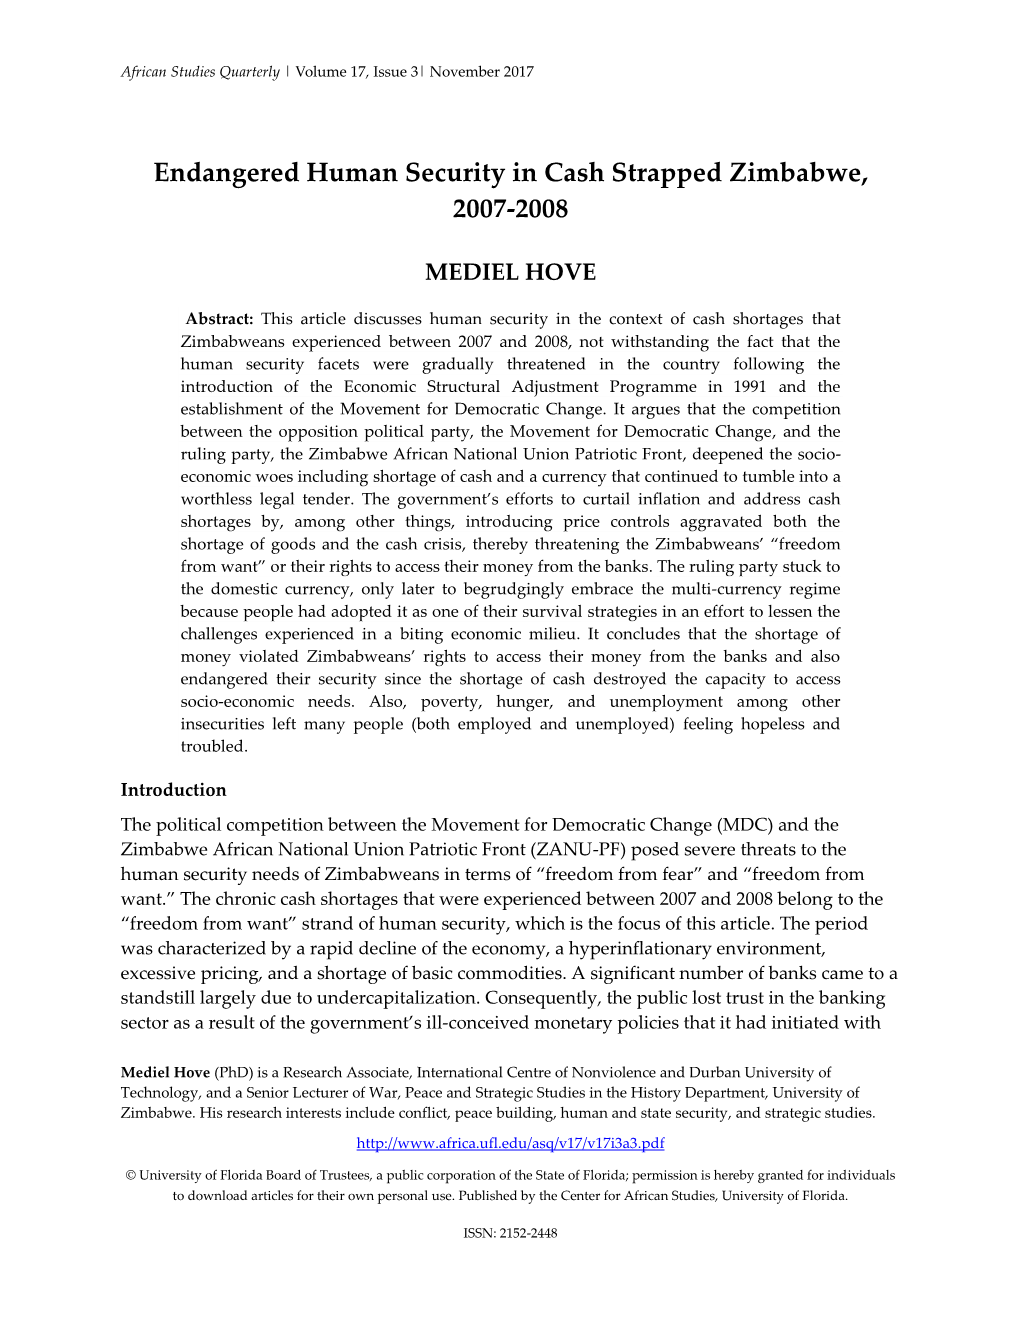 Endangered Human Security in Cash Strapped Zimbabwe, 2007-2008